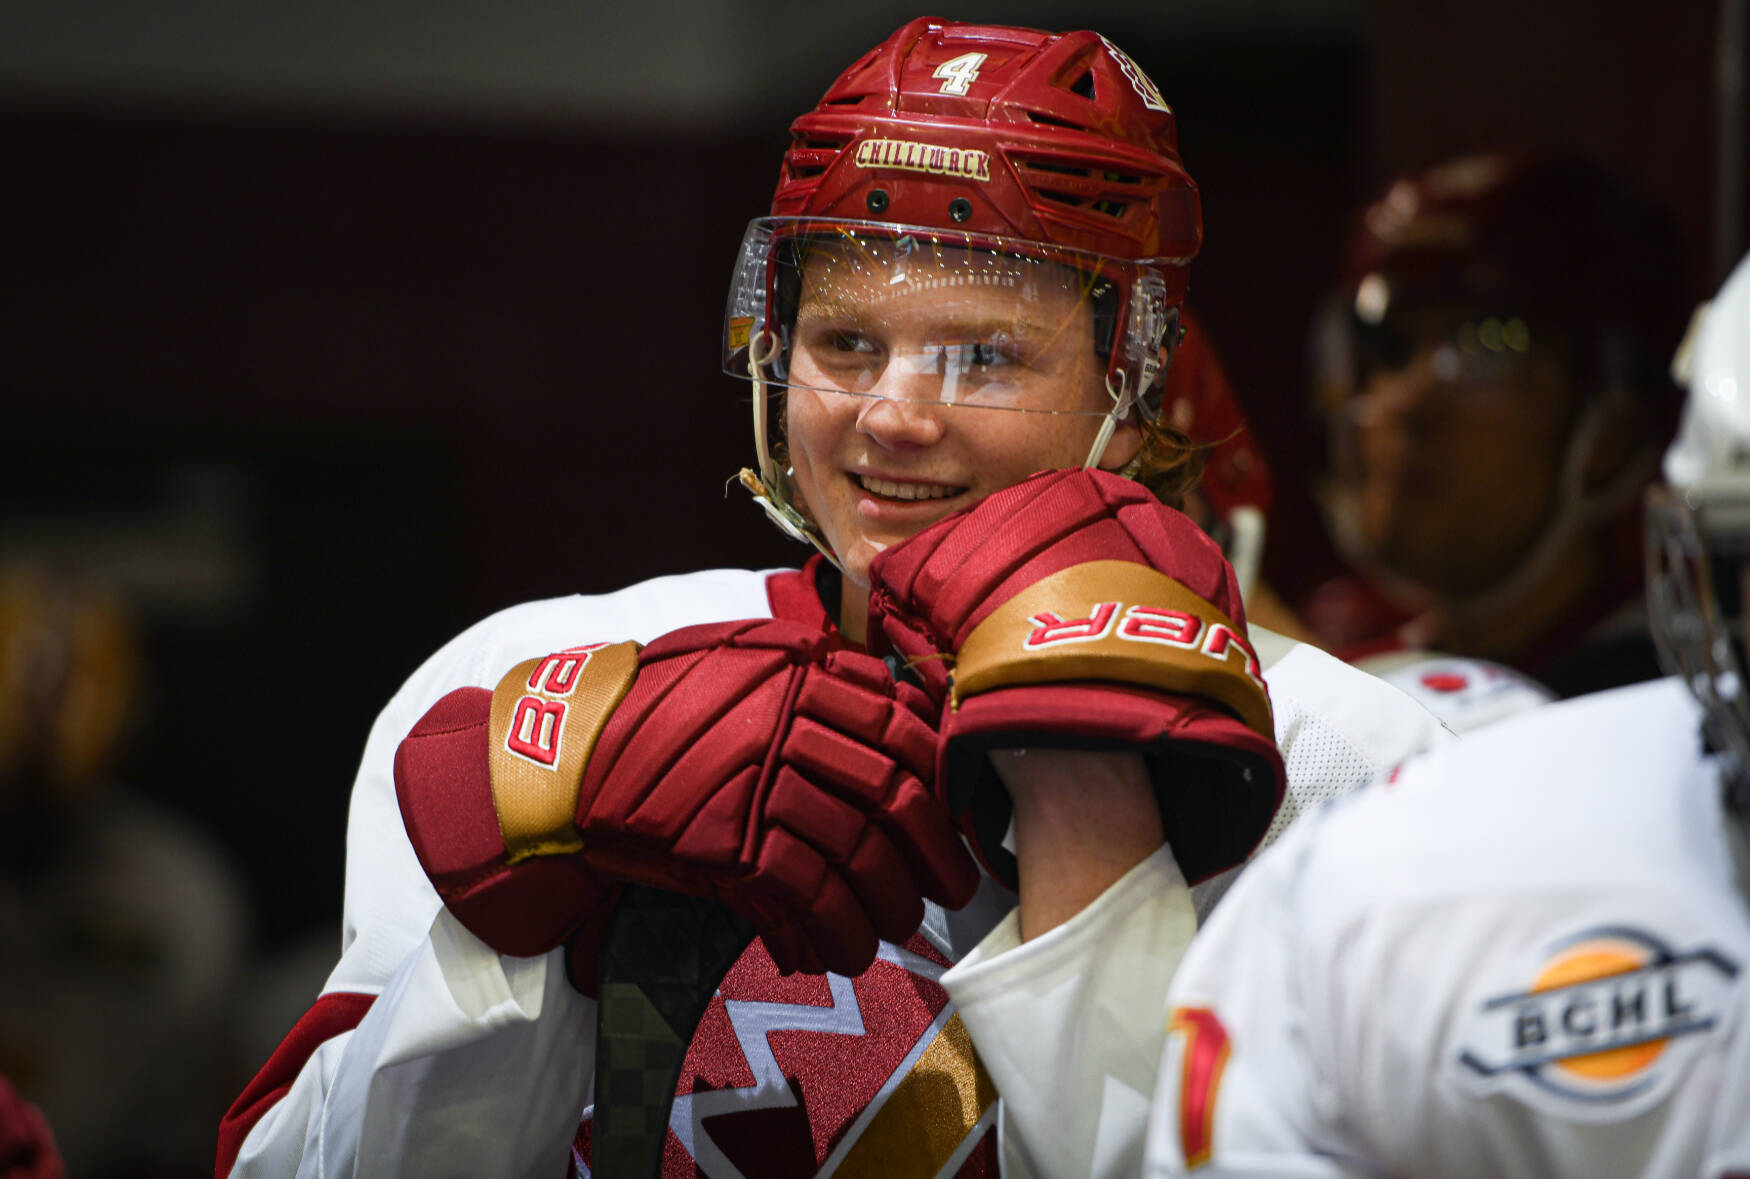 Chilliwack Chief Abram Wiebe is one of 18 BCHLers named to the All-Star three-on-three tournament following a poll of league coaches. (Darren Francis photo)